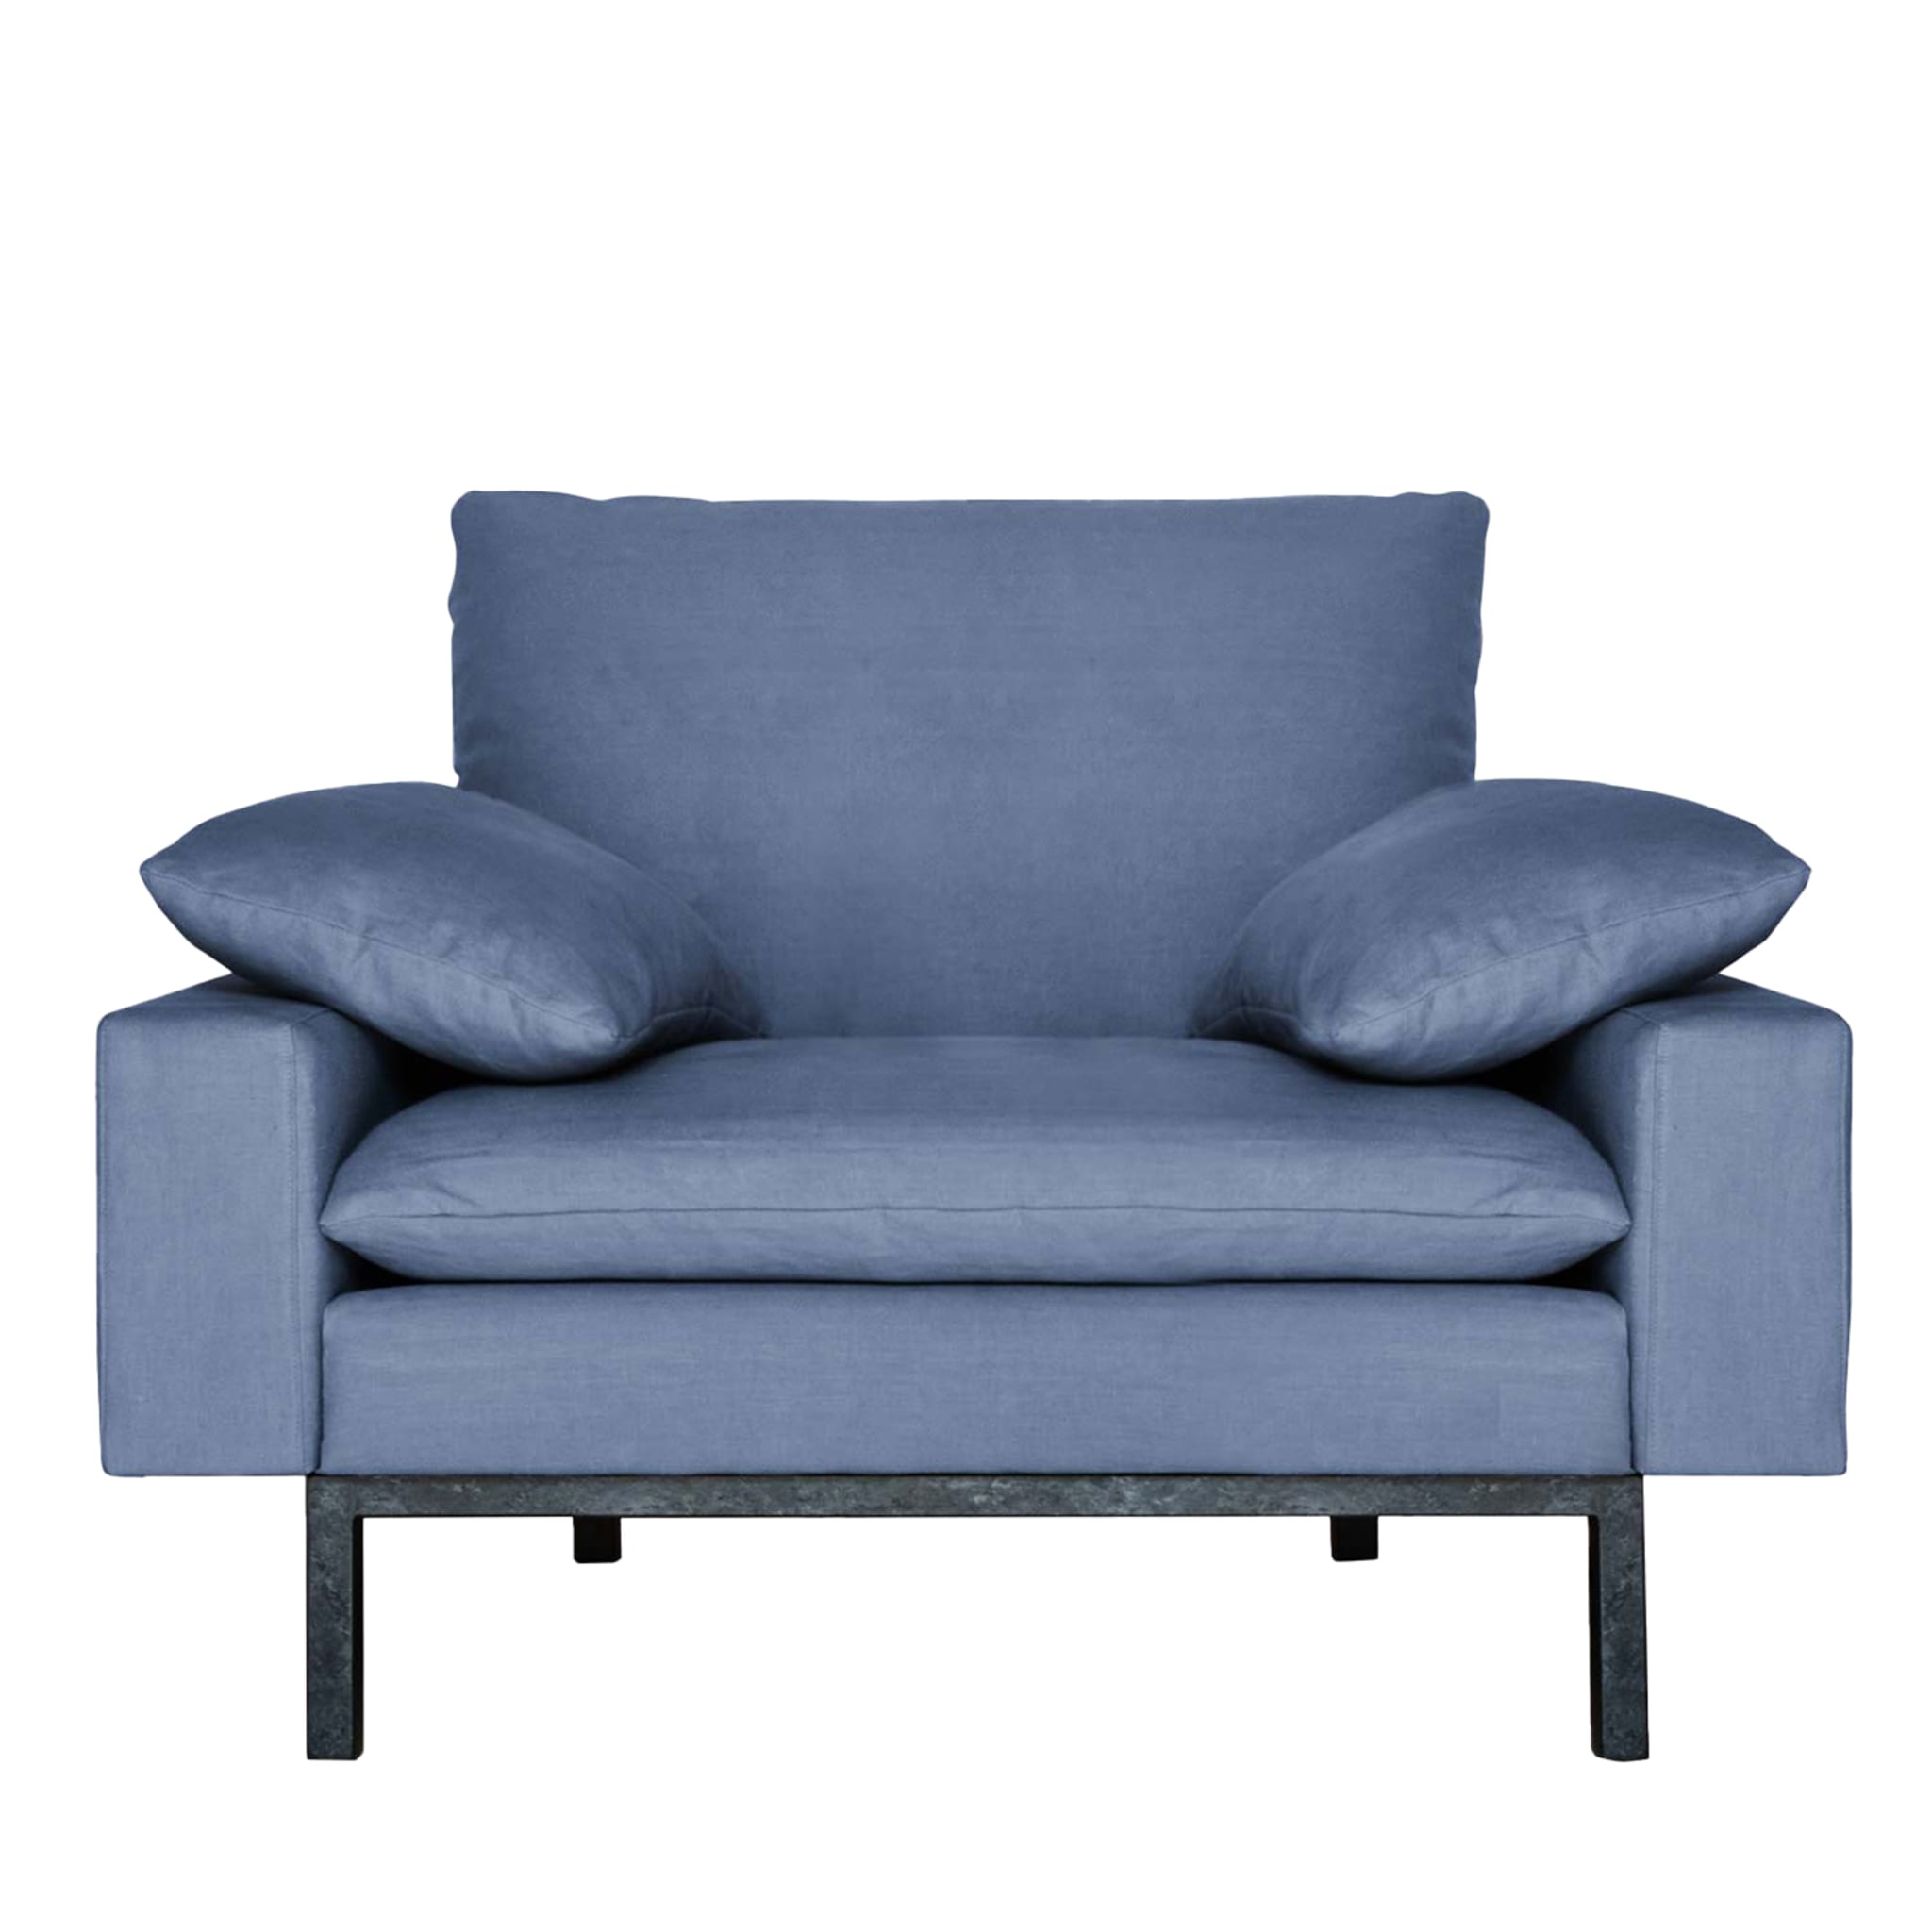 Bad Ecological Blue Armchair by Vanessa Tambelli - Main view